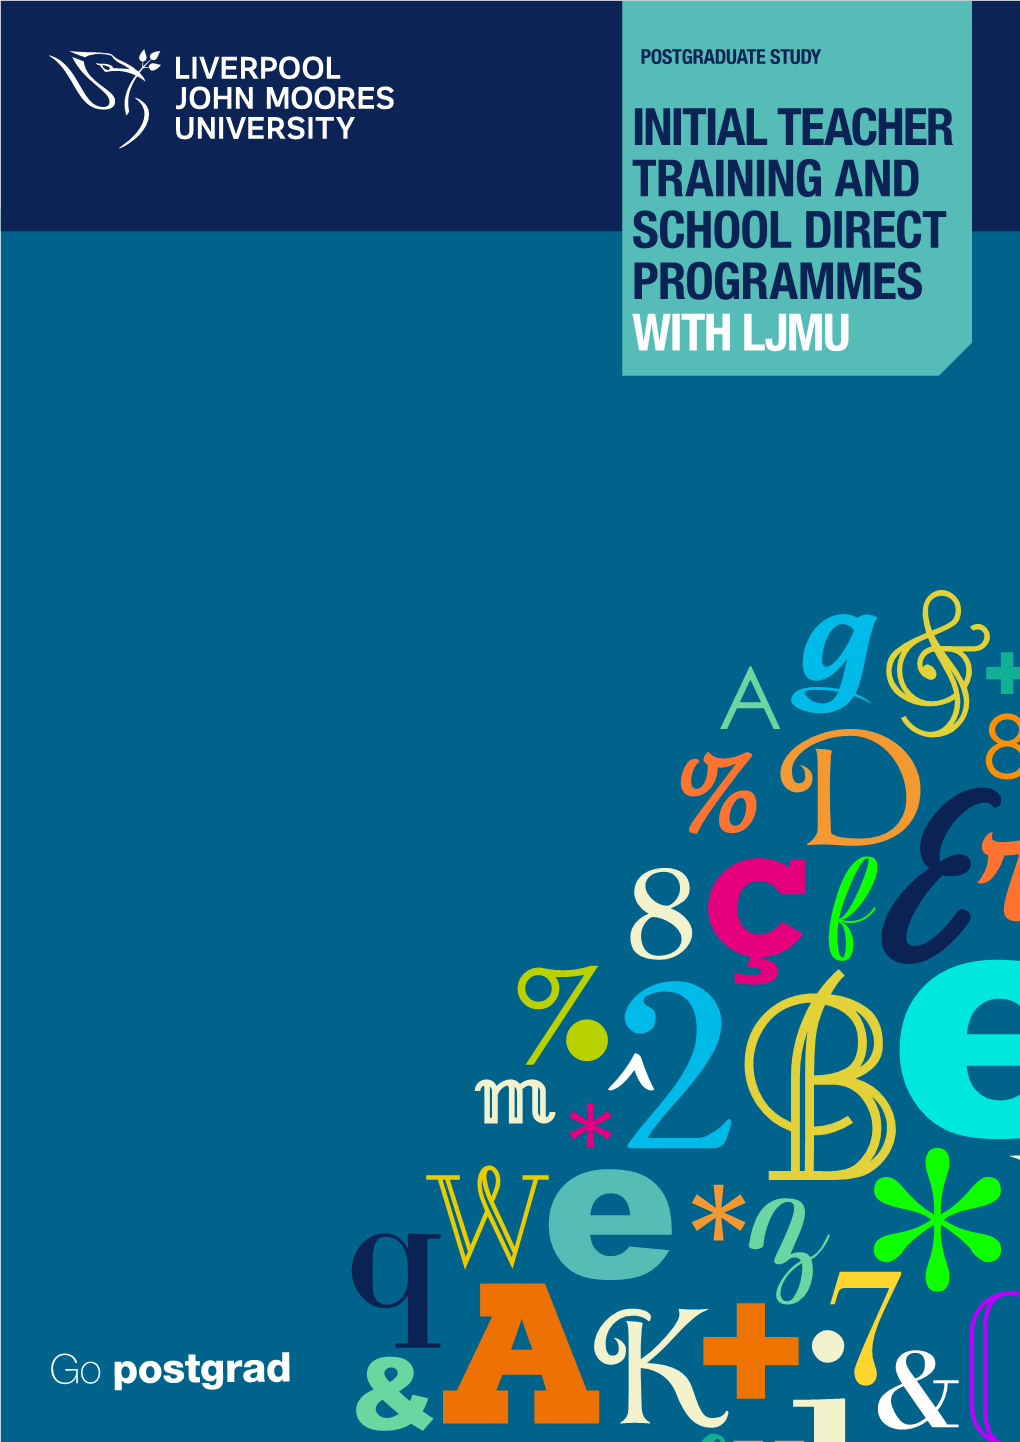 Initial Teacher Training and School Direct Programmes with Ljmu